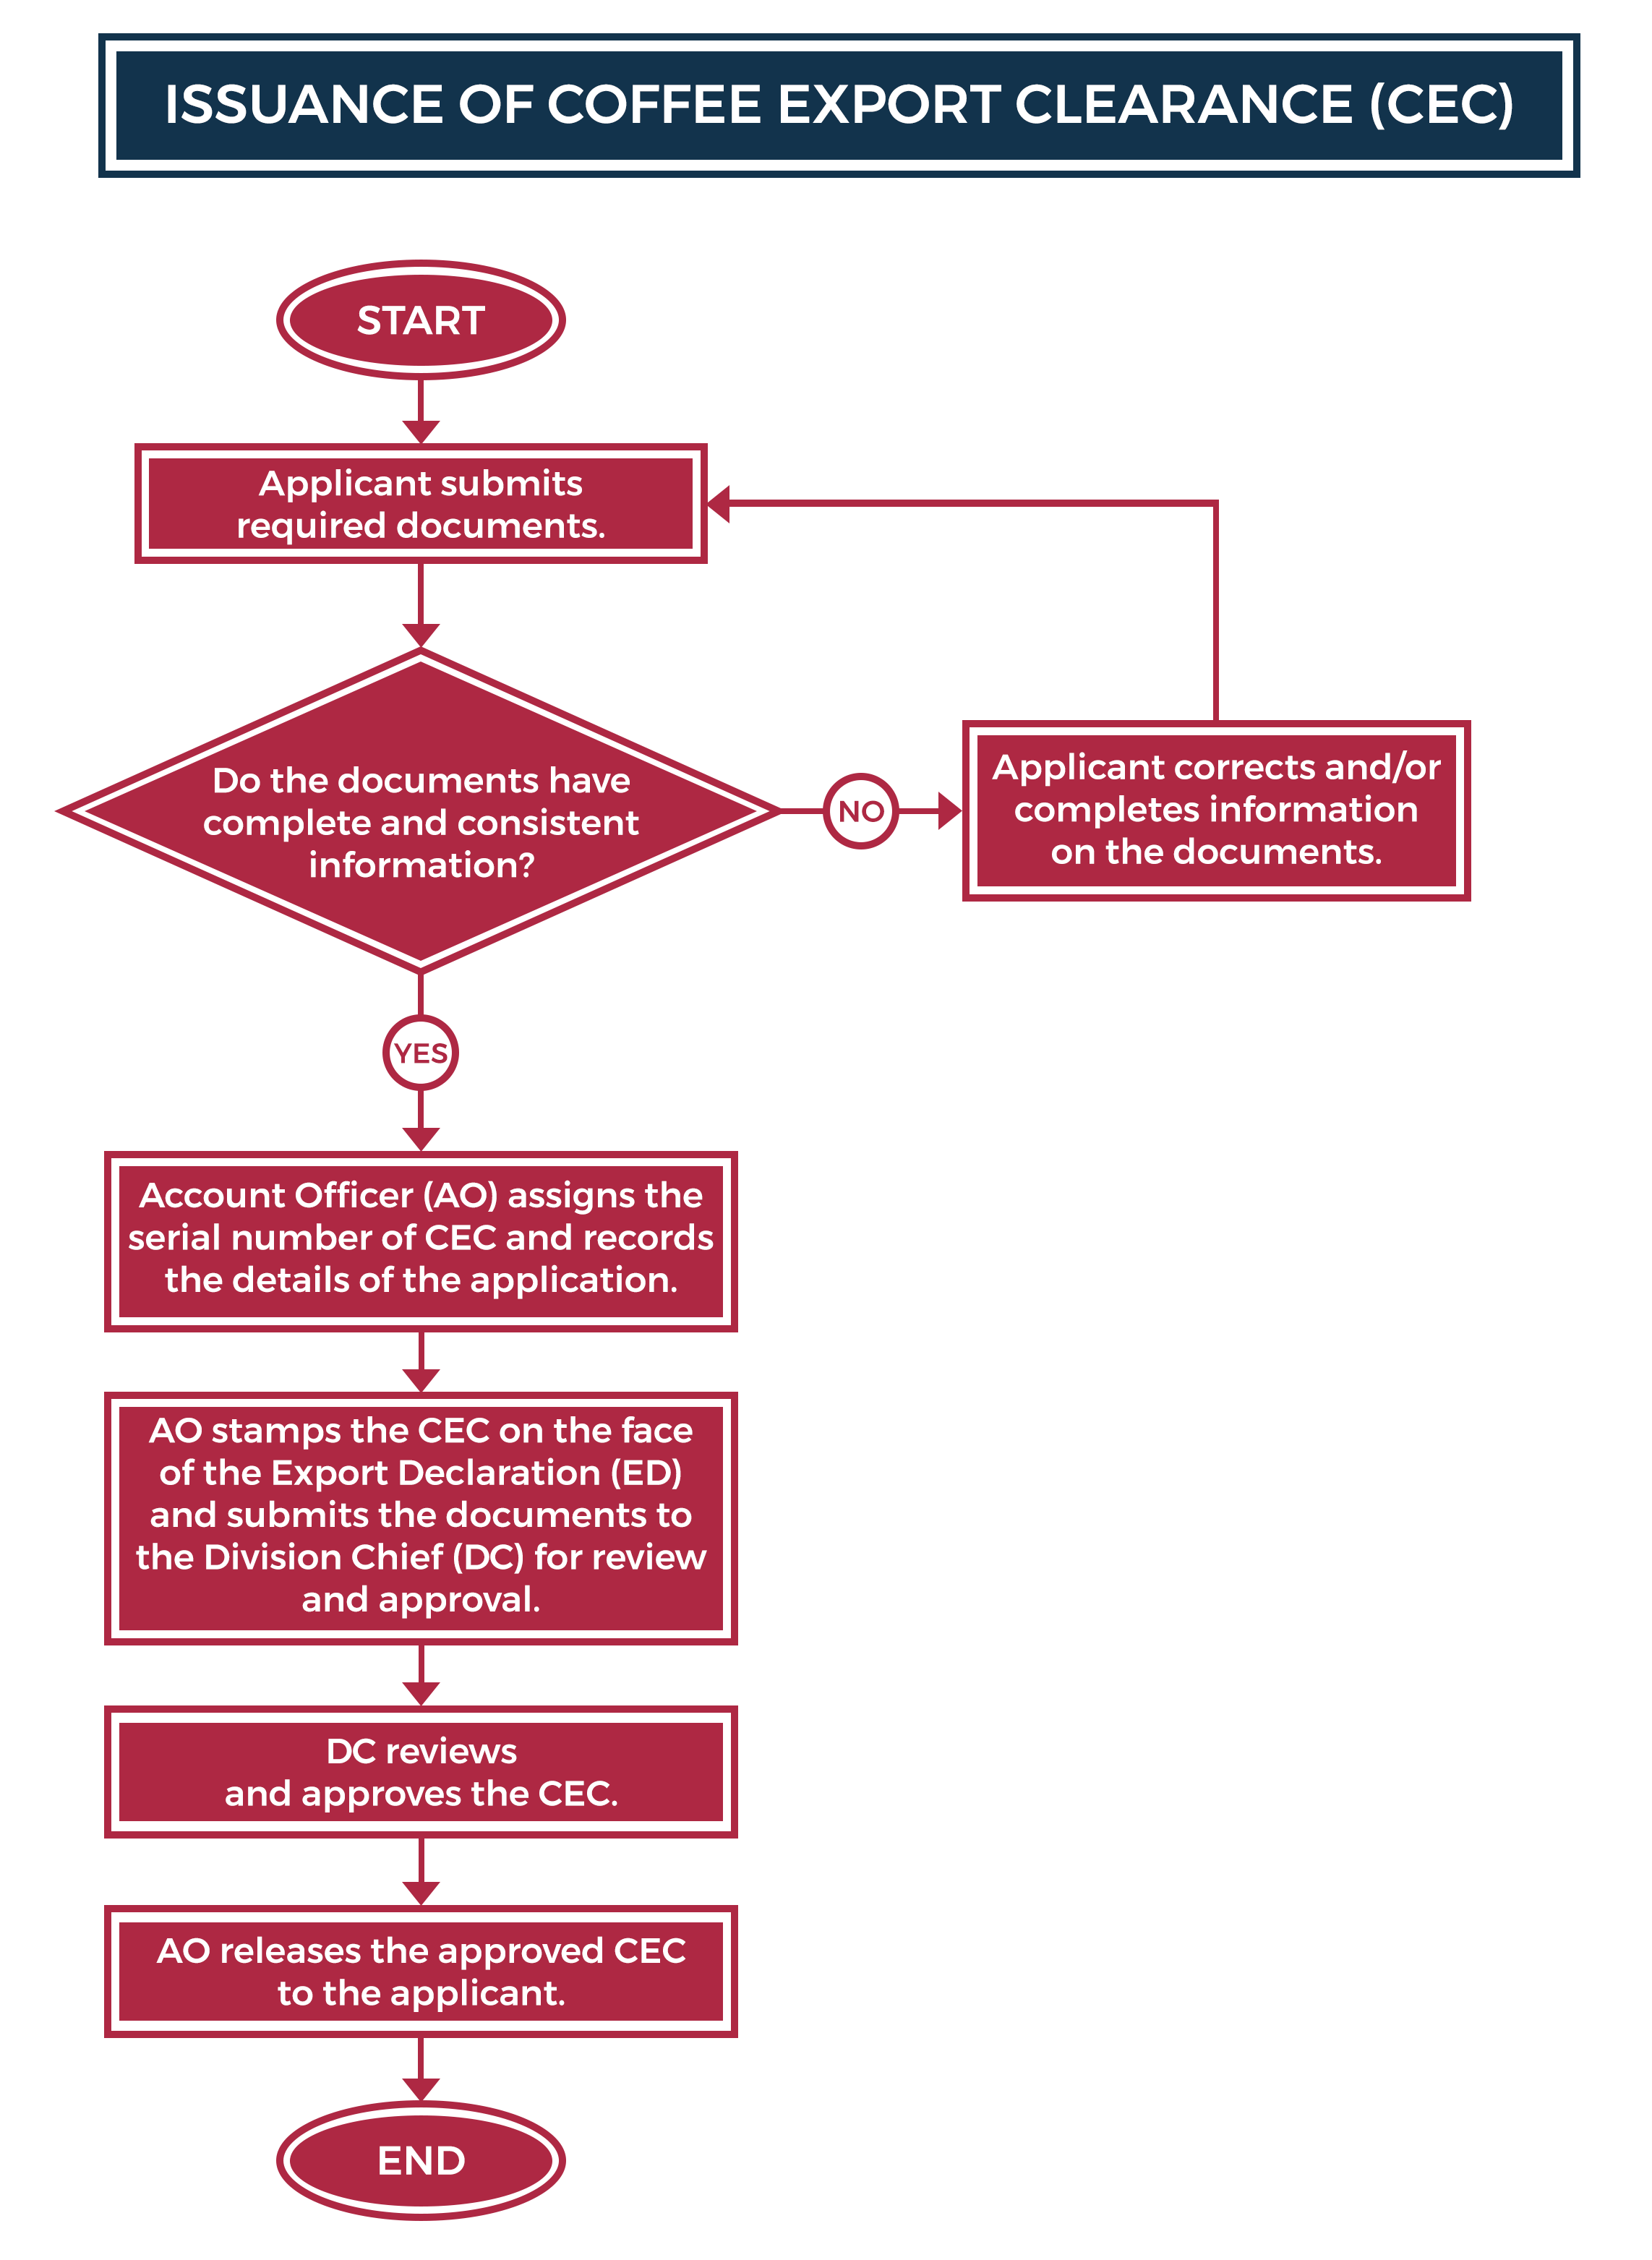 Issuance of Coffee Export Clearance Flowchart